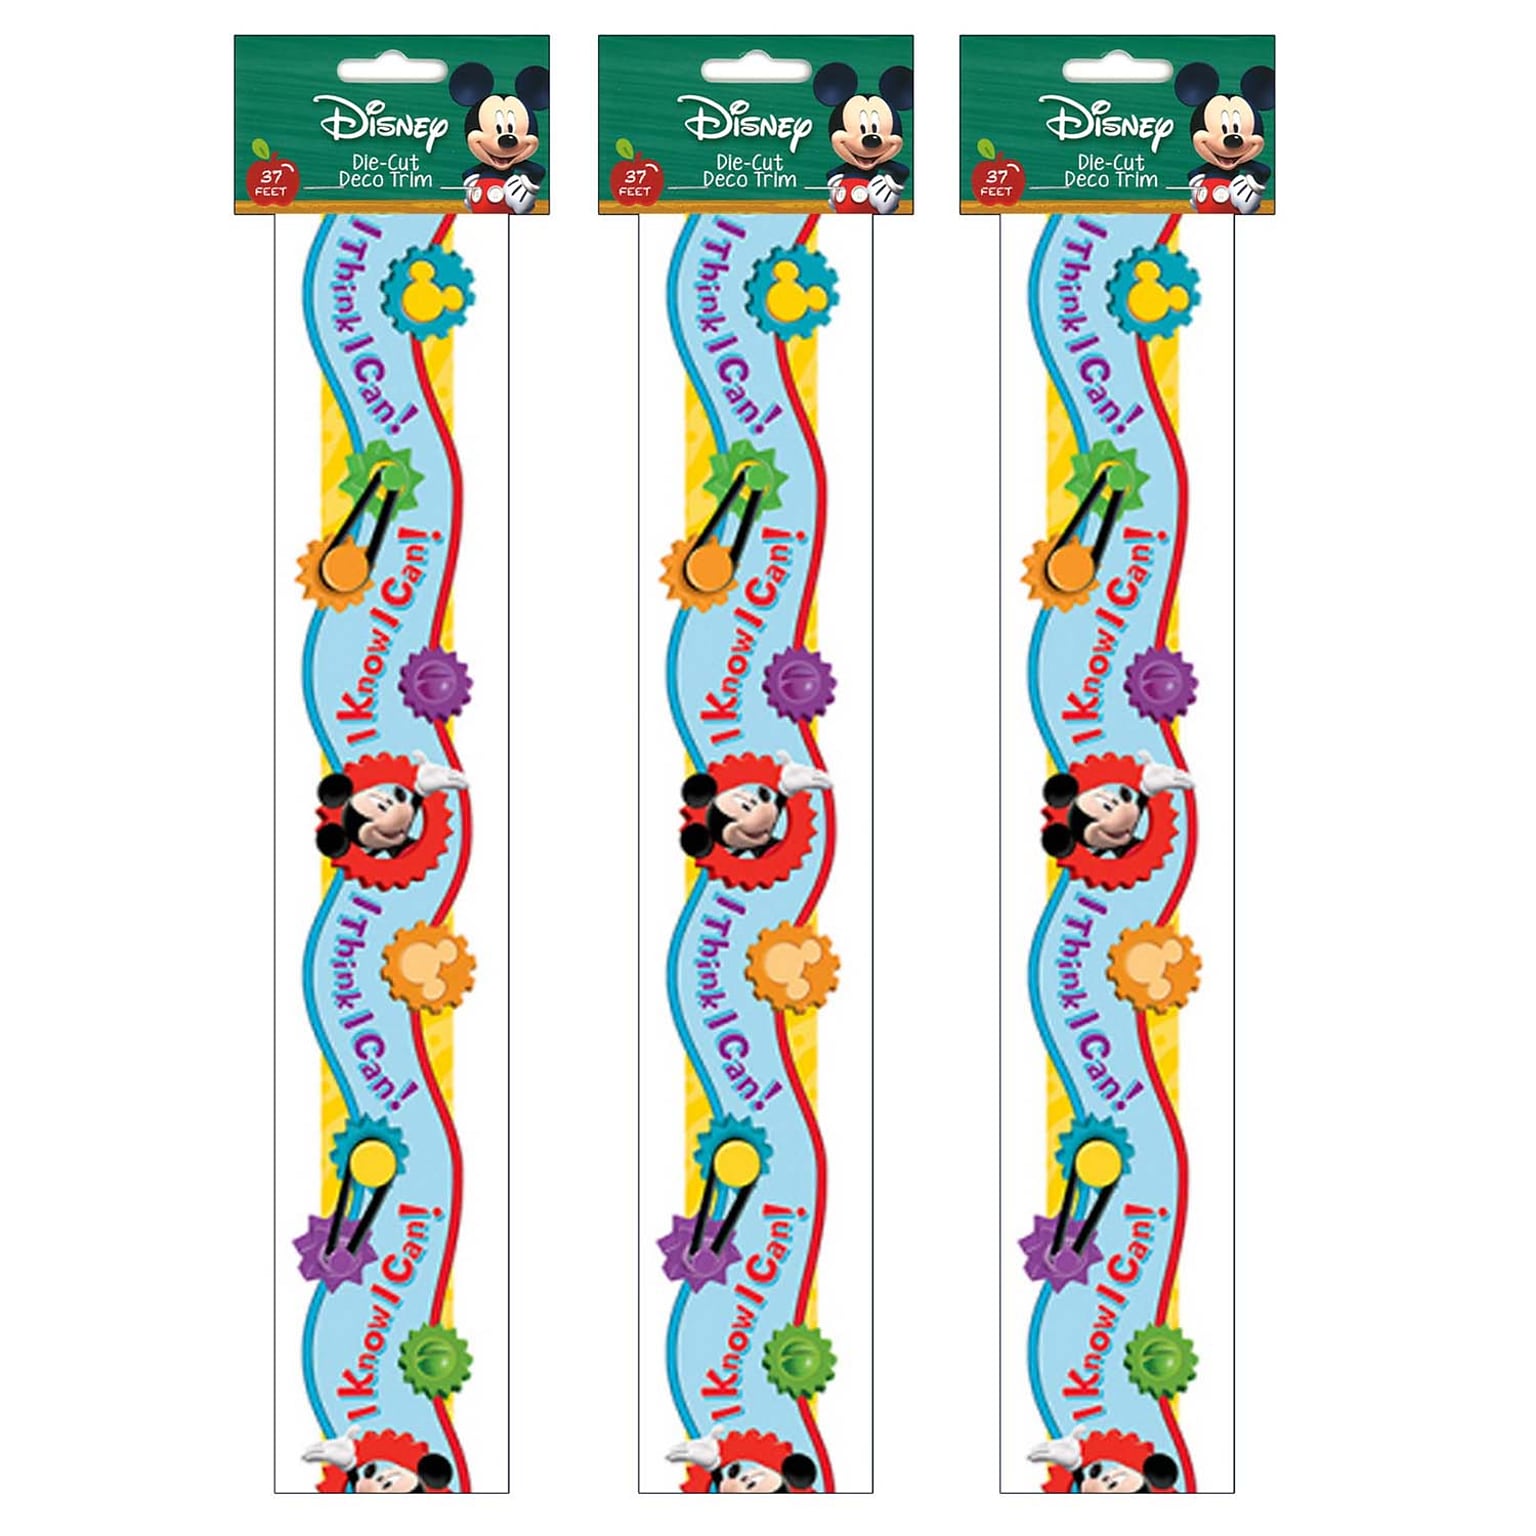 Eureka Mickey Mouse Clubhouse I Think I Can Extra Wide Cut Deco Trim®, 37 Feet Per Pack, 3 Packs (EU-845209-3)